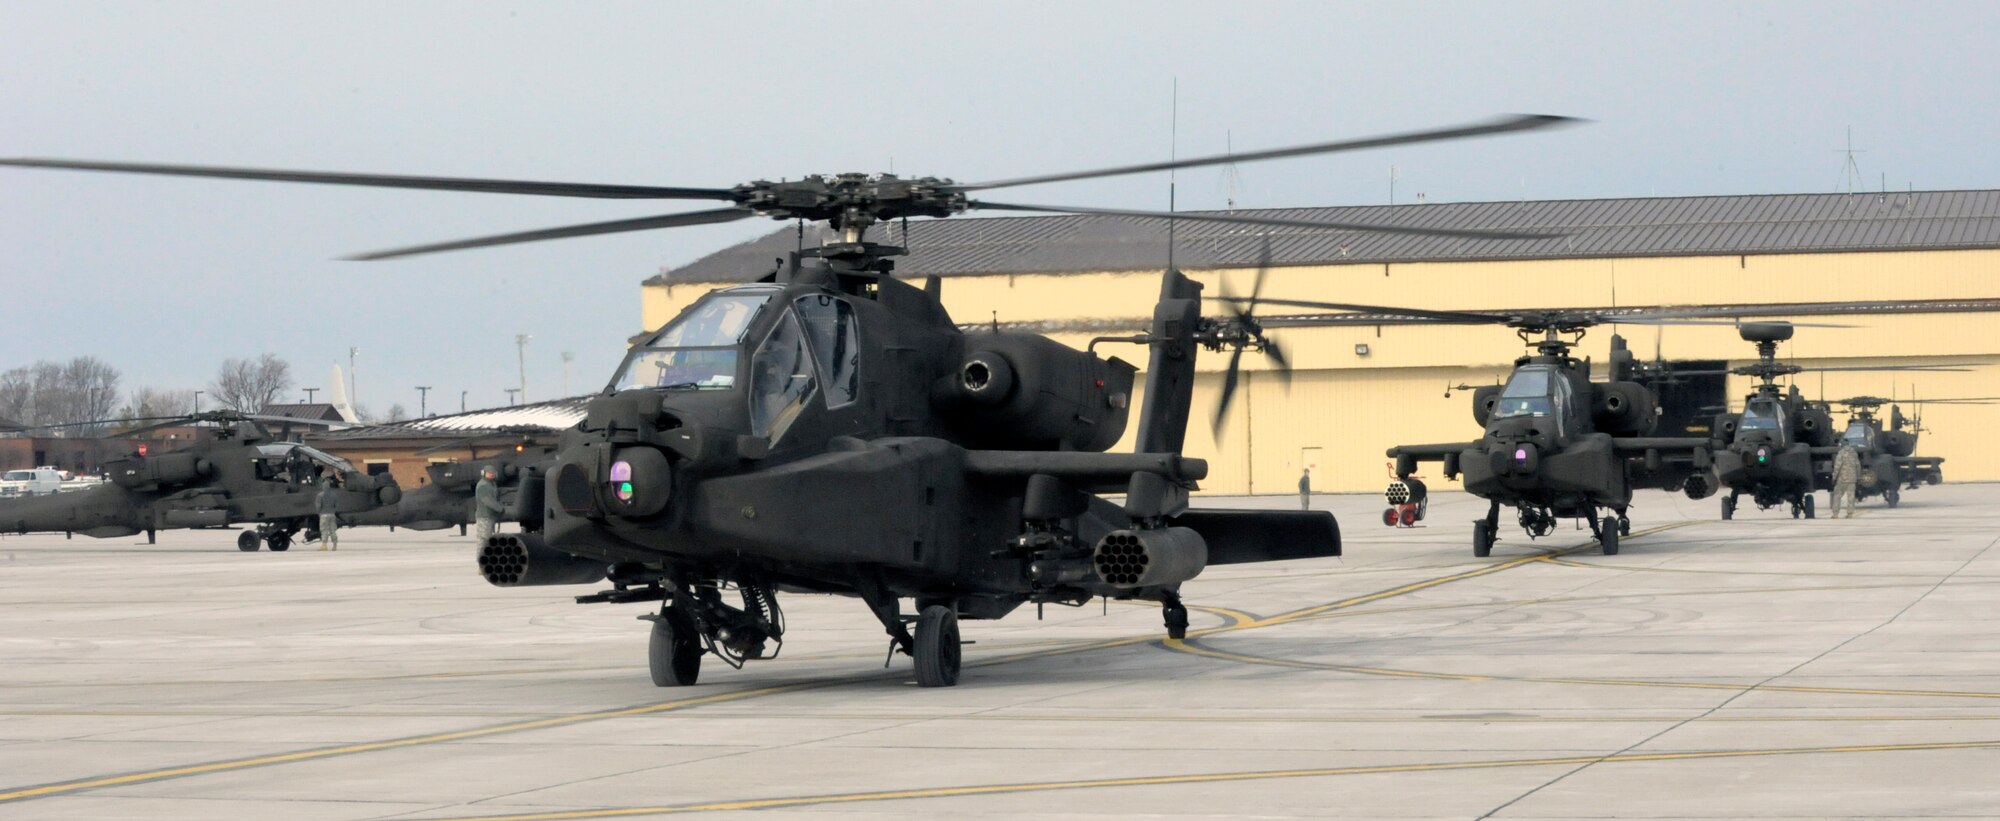 U.S. Army AH-64 Apache Longbows pilots from the 1-135th Attack Reconnaissance Battalion at Whiteman Air Force Base, Mo., prepare March 27, 2013, for their deployment to Afghanistan. The Apaches carry three weapons systems, including a state-of-the-art Hellfire missile that can be laser-guided or radar-guided. (U.S. Air Force photo by Airman 1st Class Shelby R. Orozco/Released)